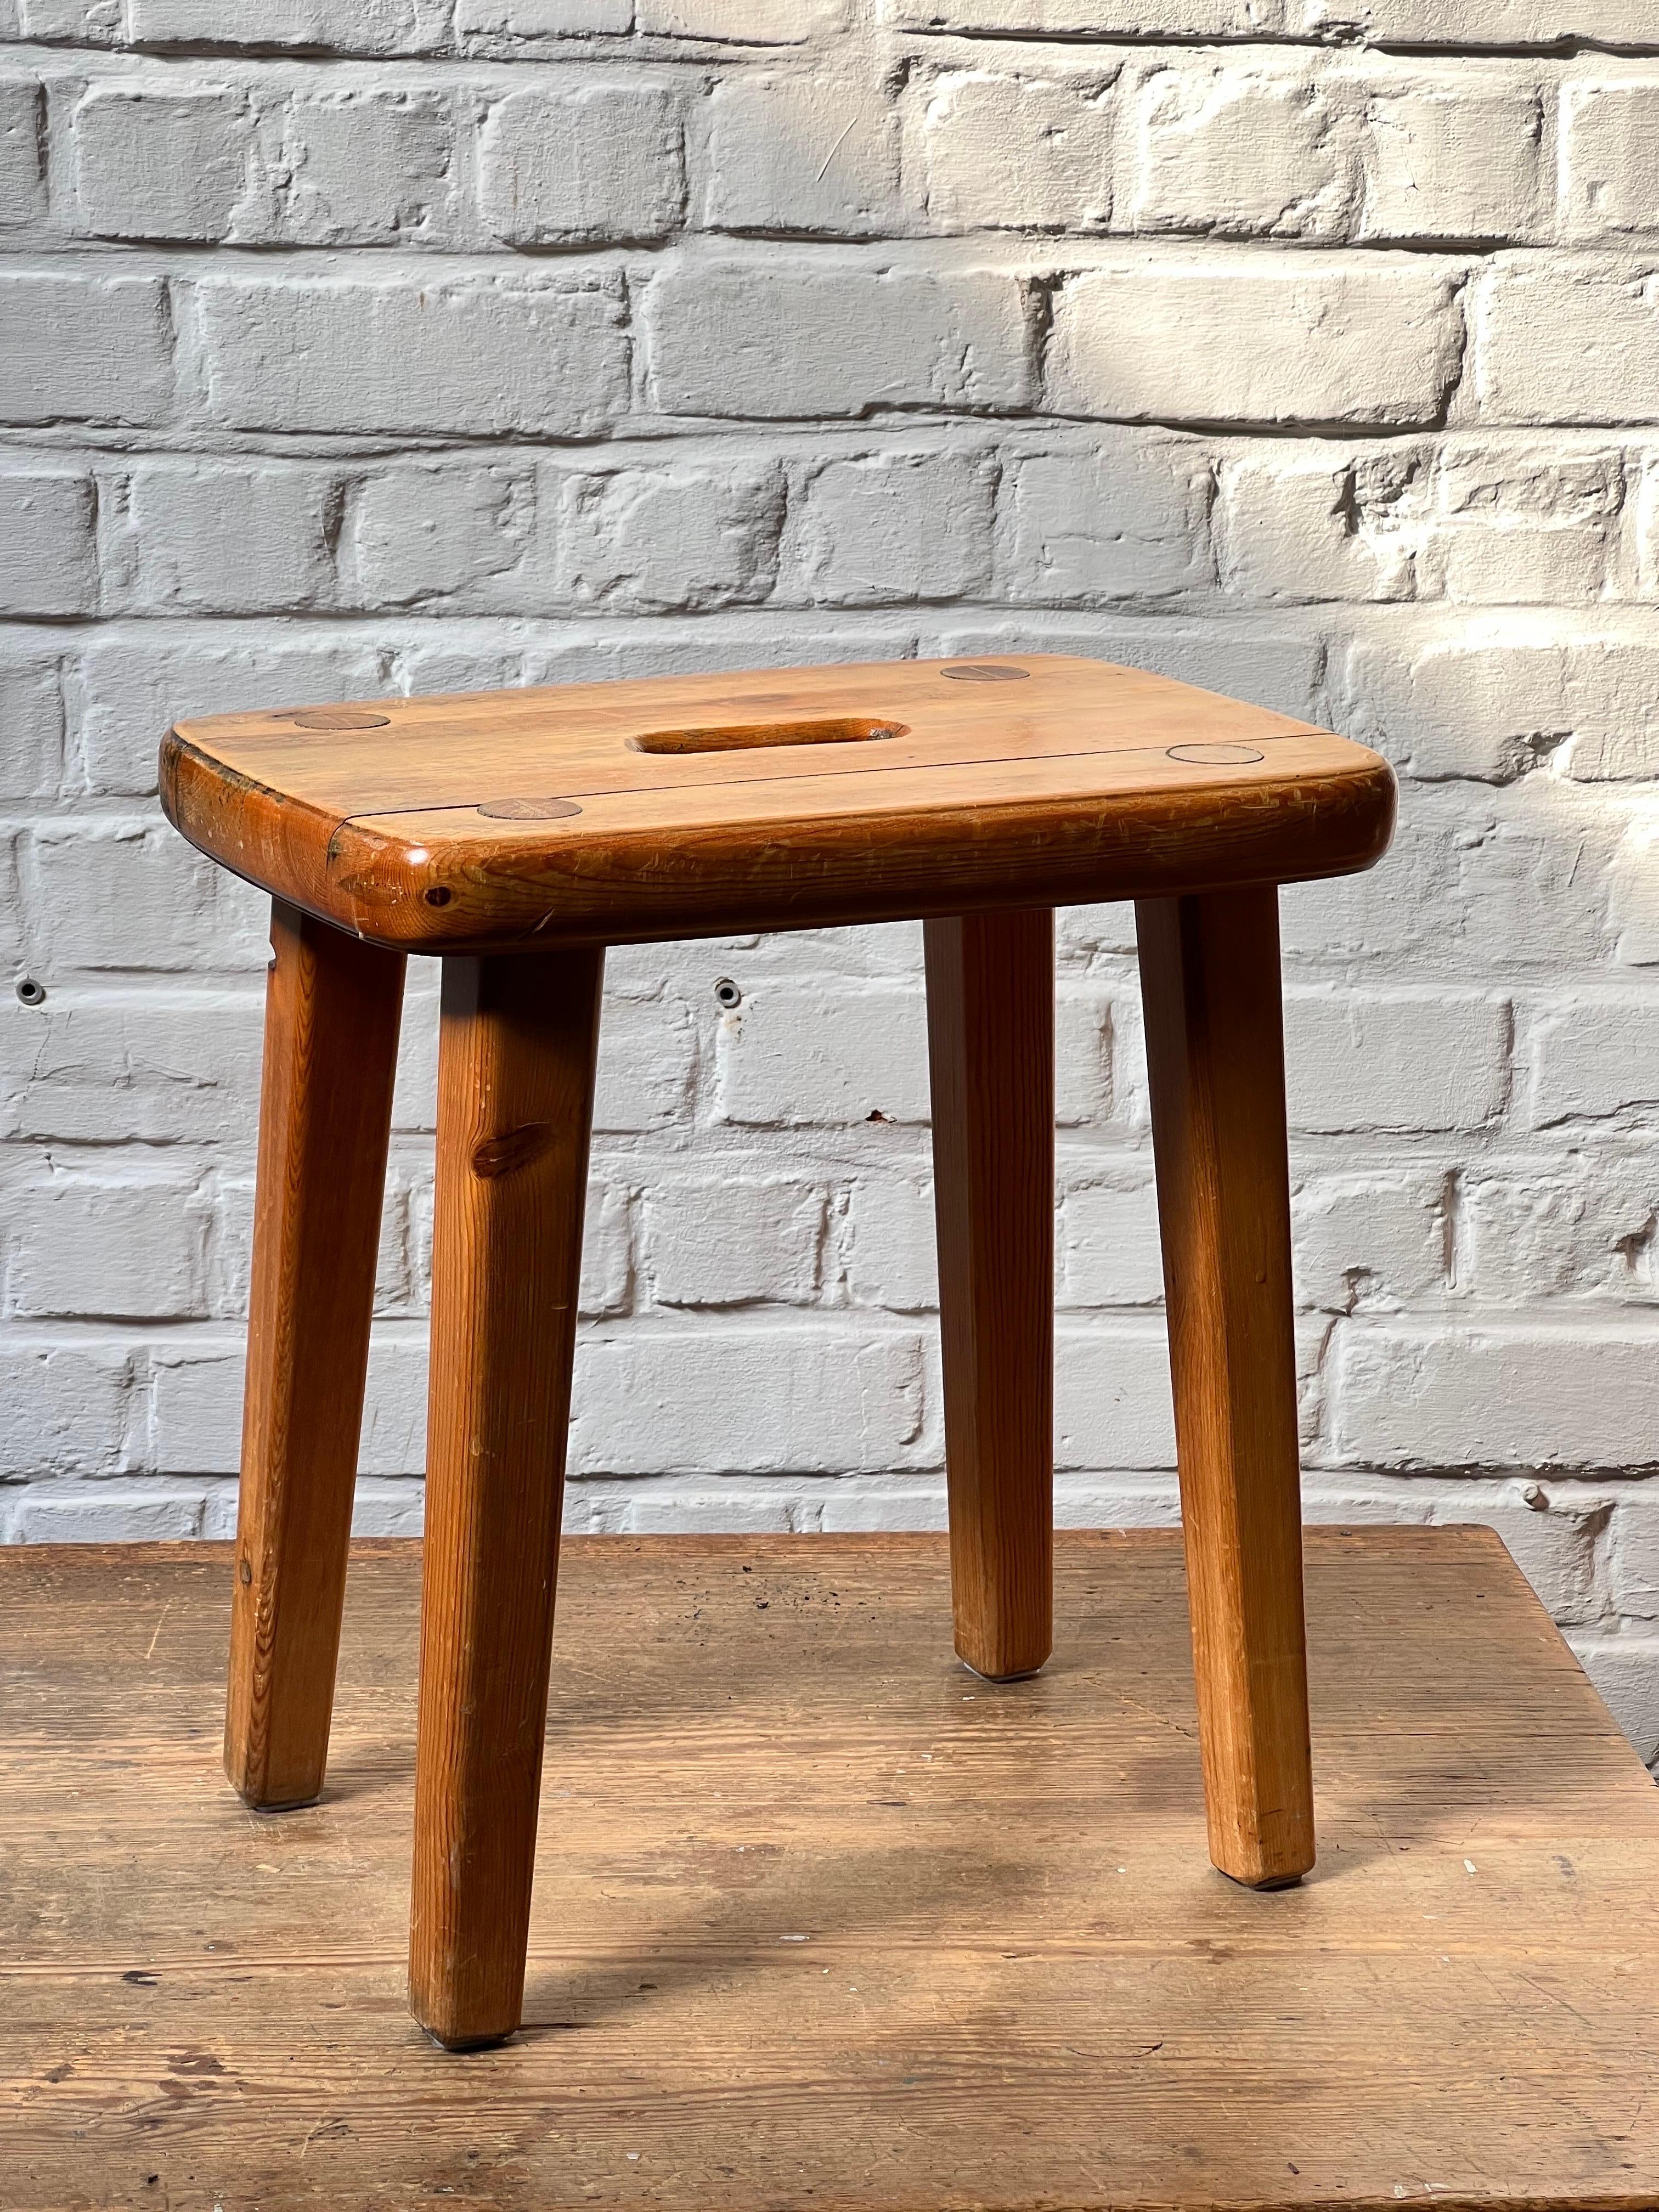 Handmade Swedish stool with massive slasy of pine. It is a rectangular shaped. The joinery is really elegant. The top is patinated and shows various shades of  honey tones. Elegant and brutalist describe that stool properly. Very strong stool.